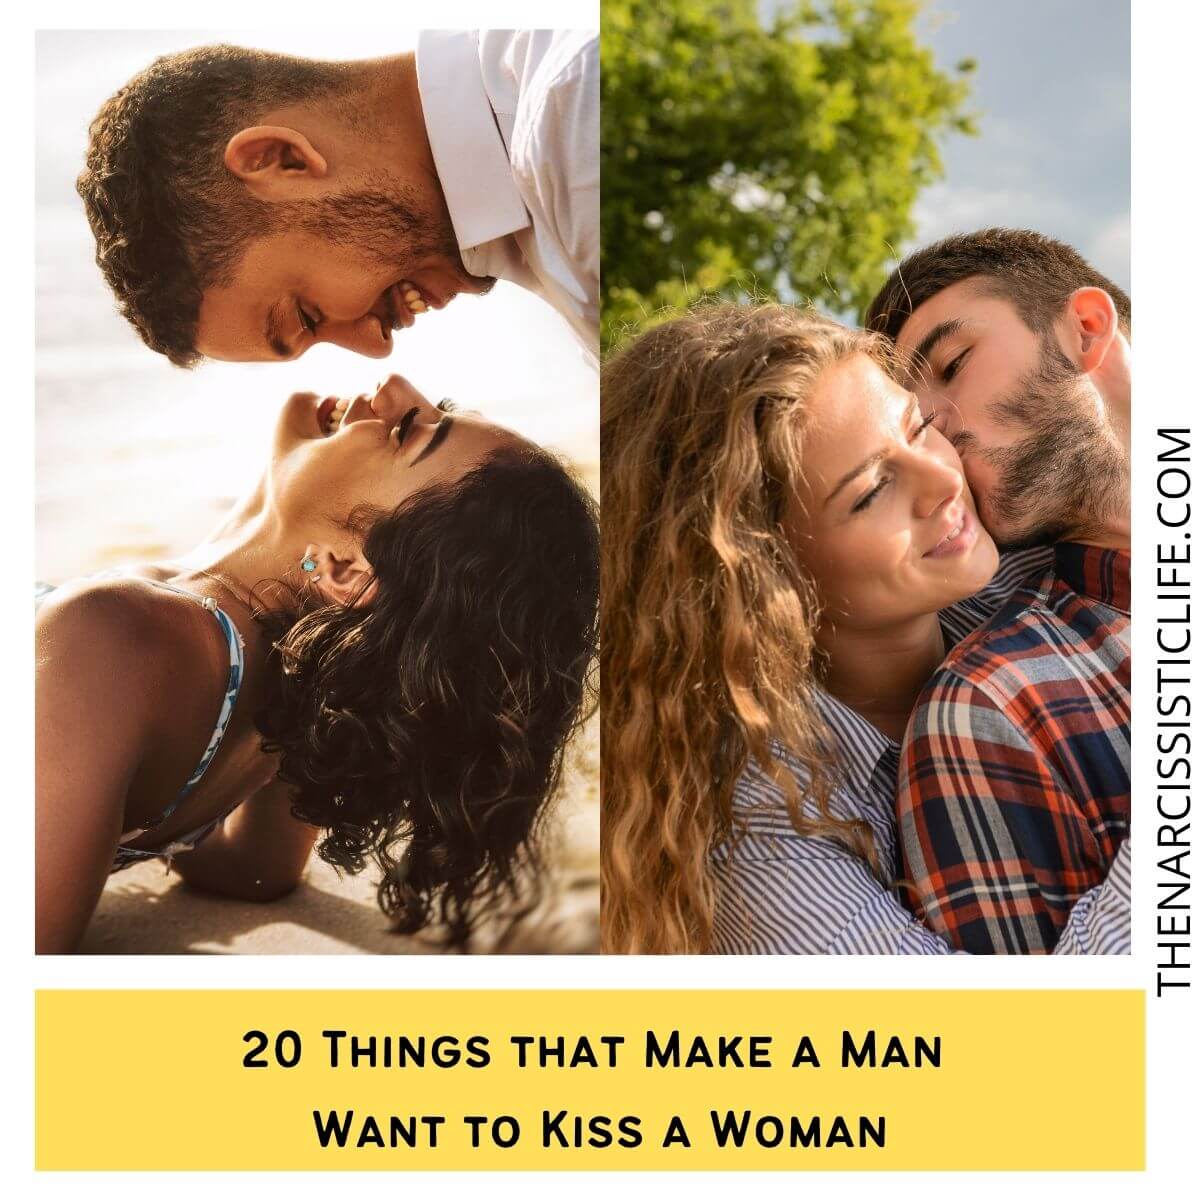 19 Things That Make A Man Want To Kiss A Woman